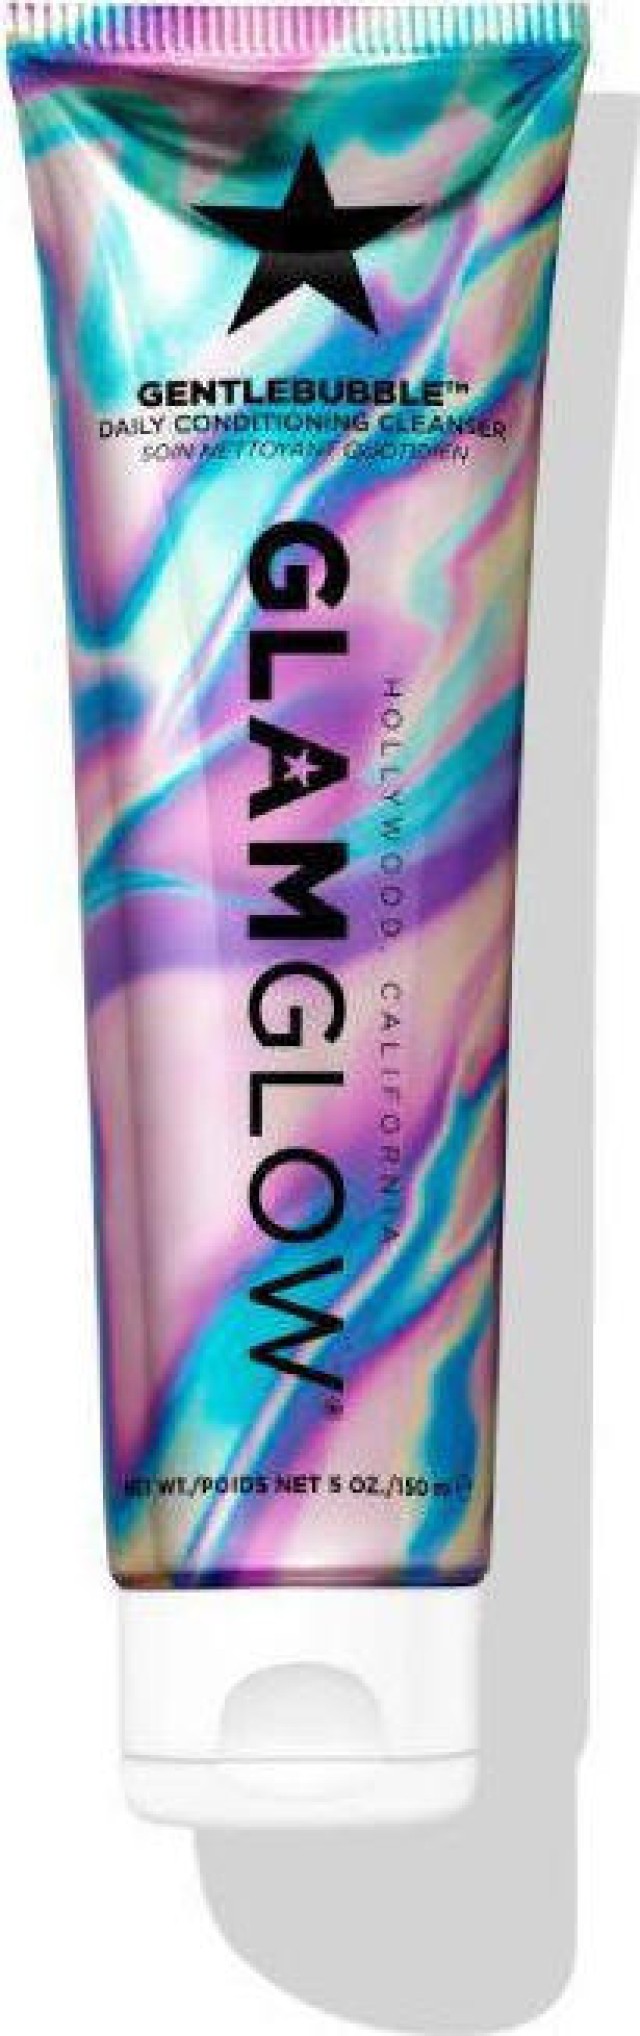 Glamglow GentleBubble Daily Conditioning Cleanser 150ml